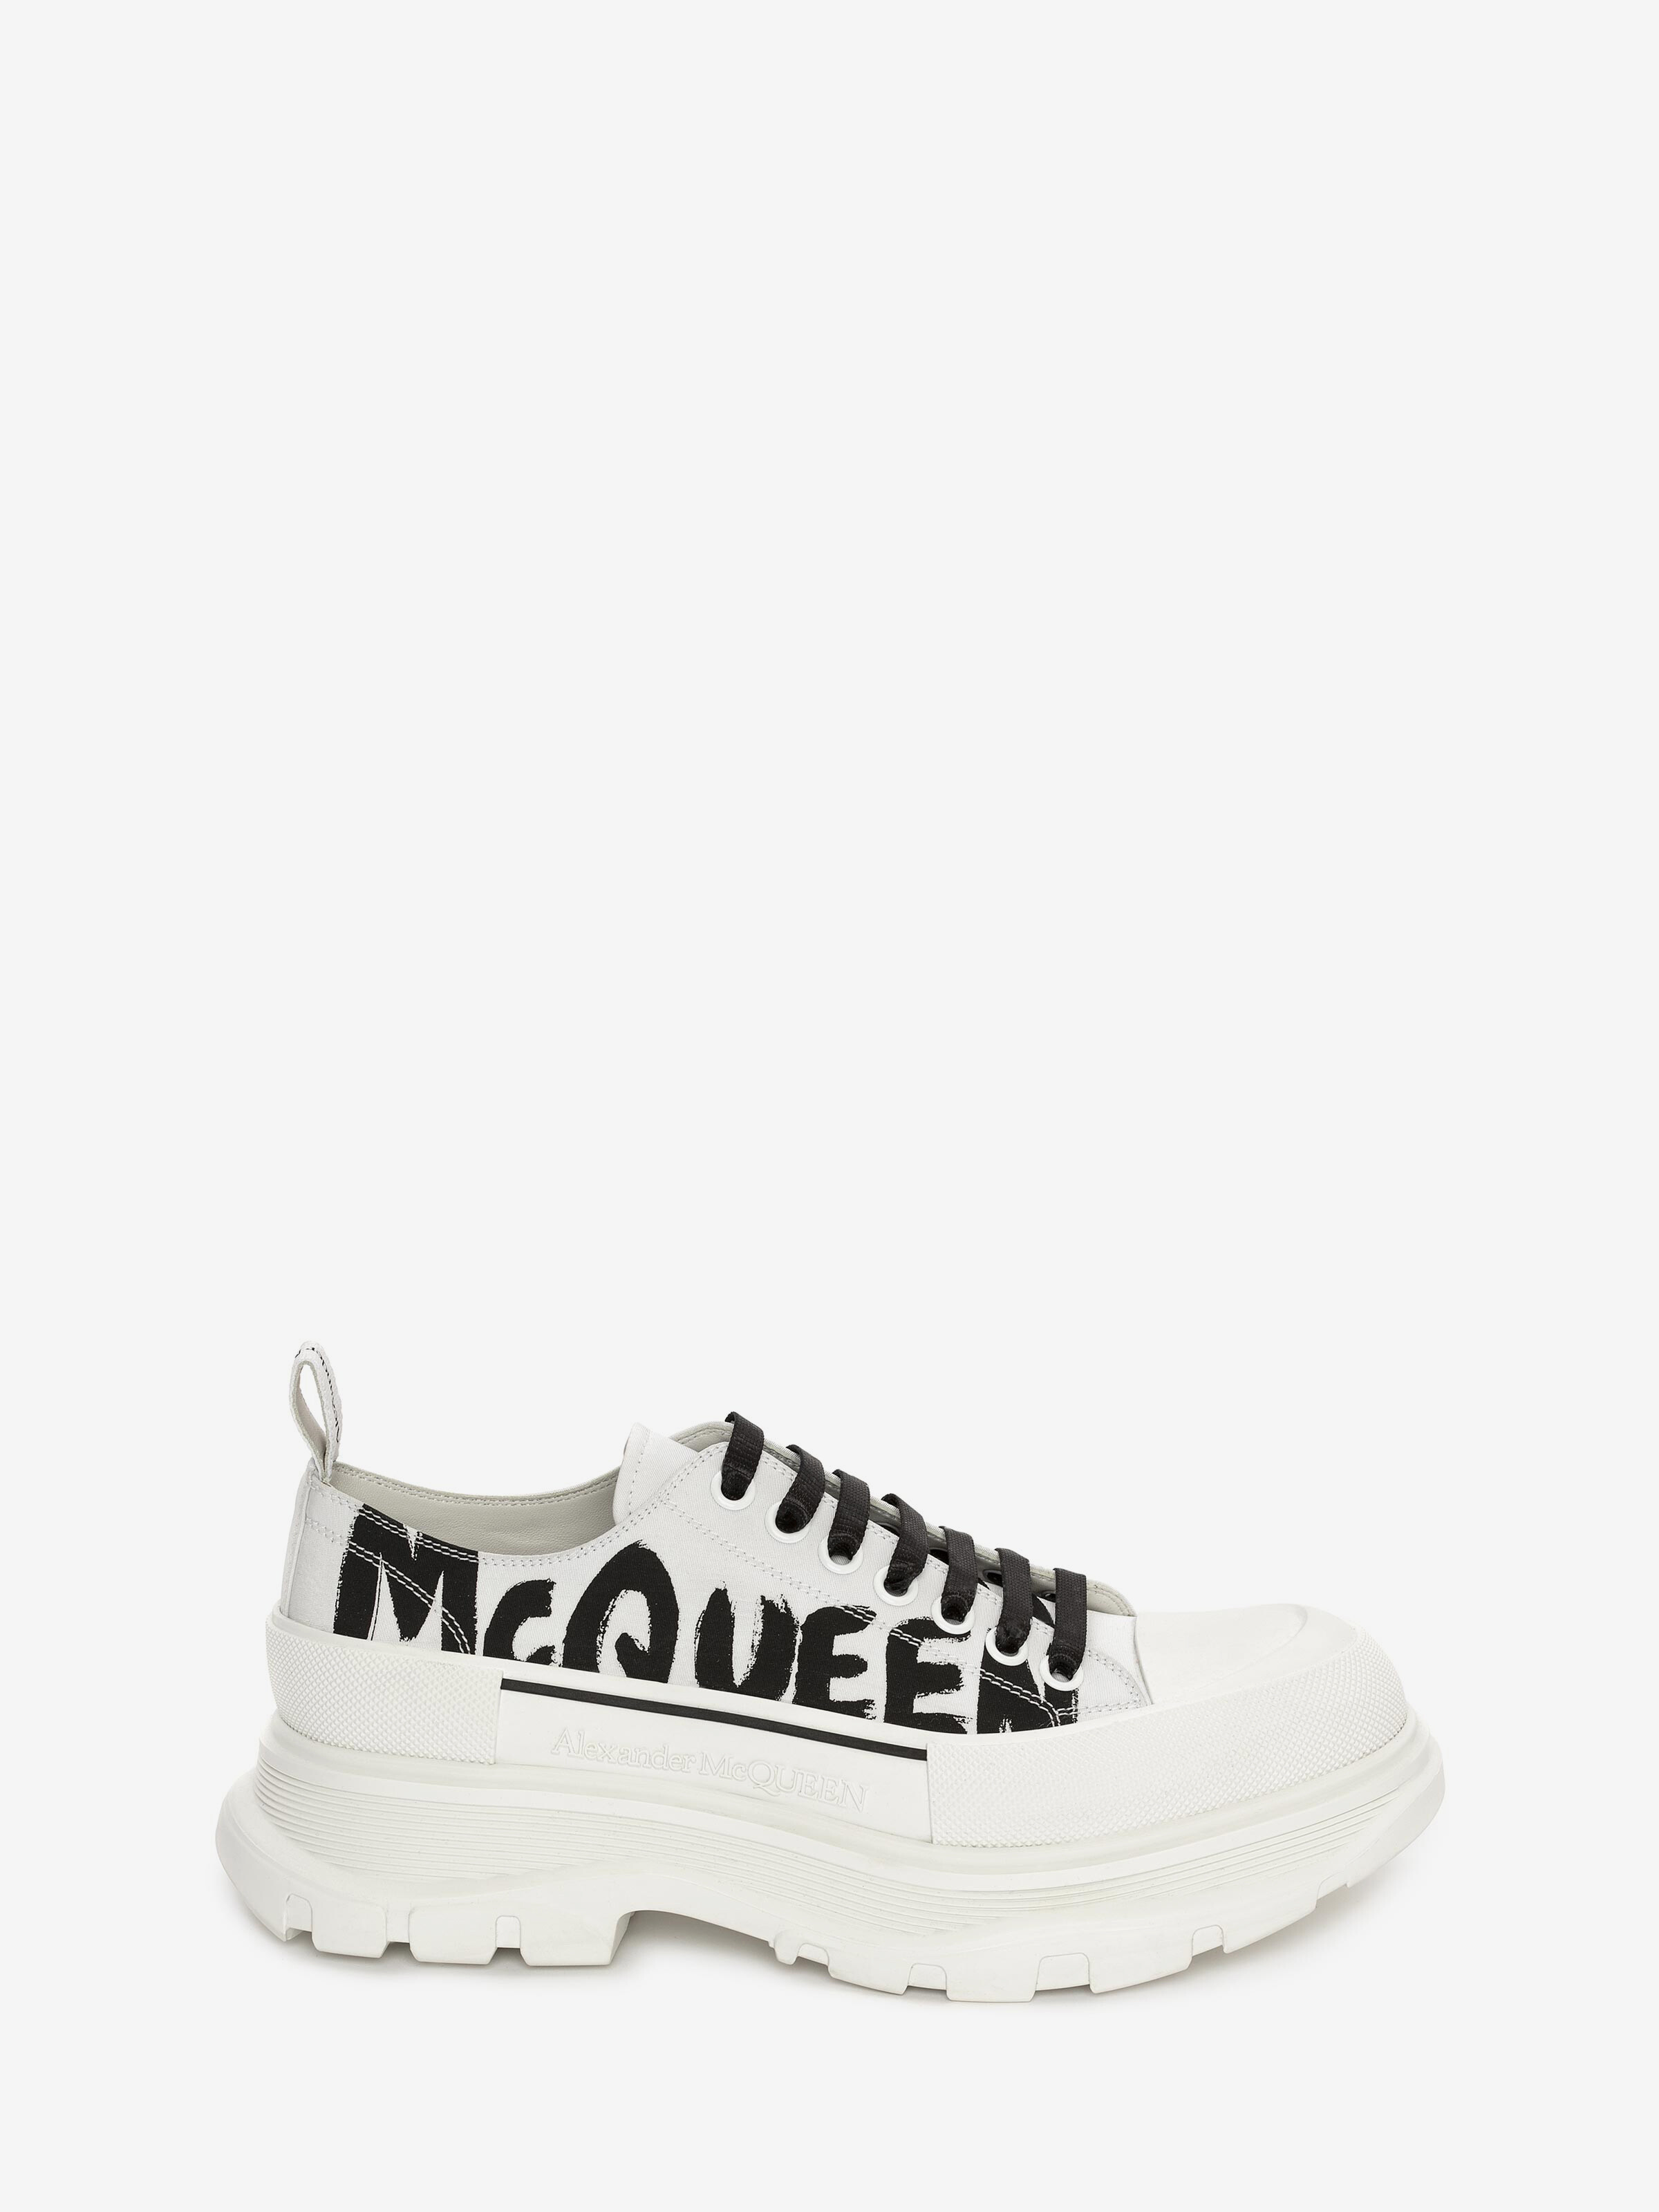 Alexander Mcqueen Tread Slick Lace Up In Optic White